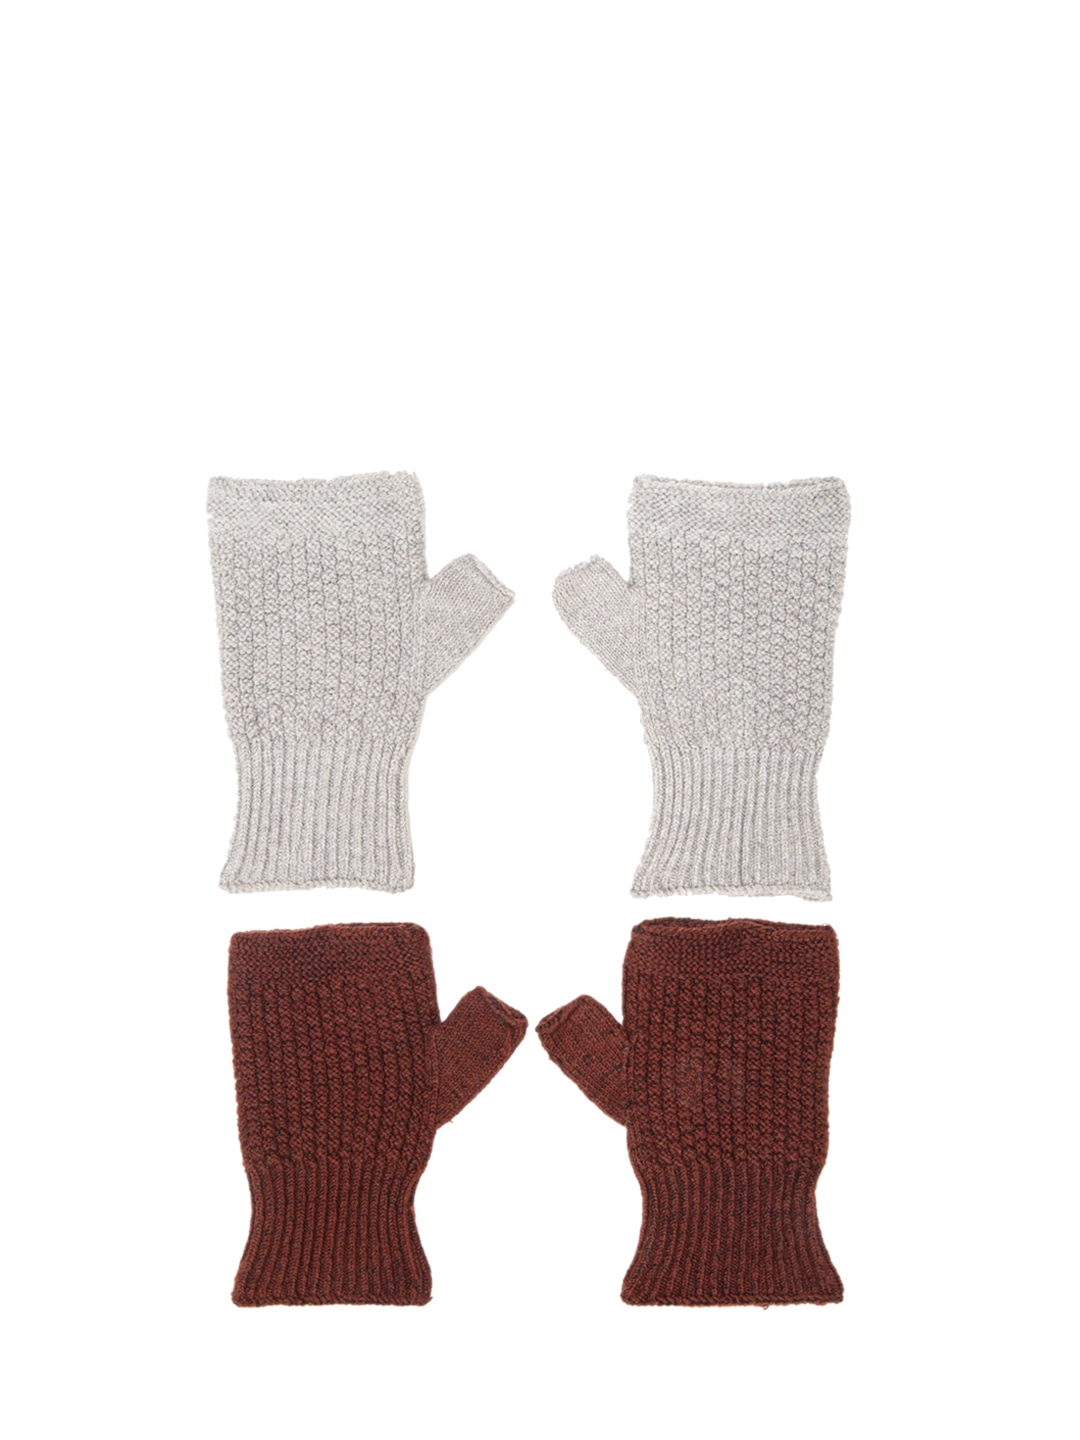 Accessories Gloves | Bharatasya Unisex Pack of 2 Grey & Brown Solid Knitted Cotton Gloves - AG35676